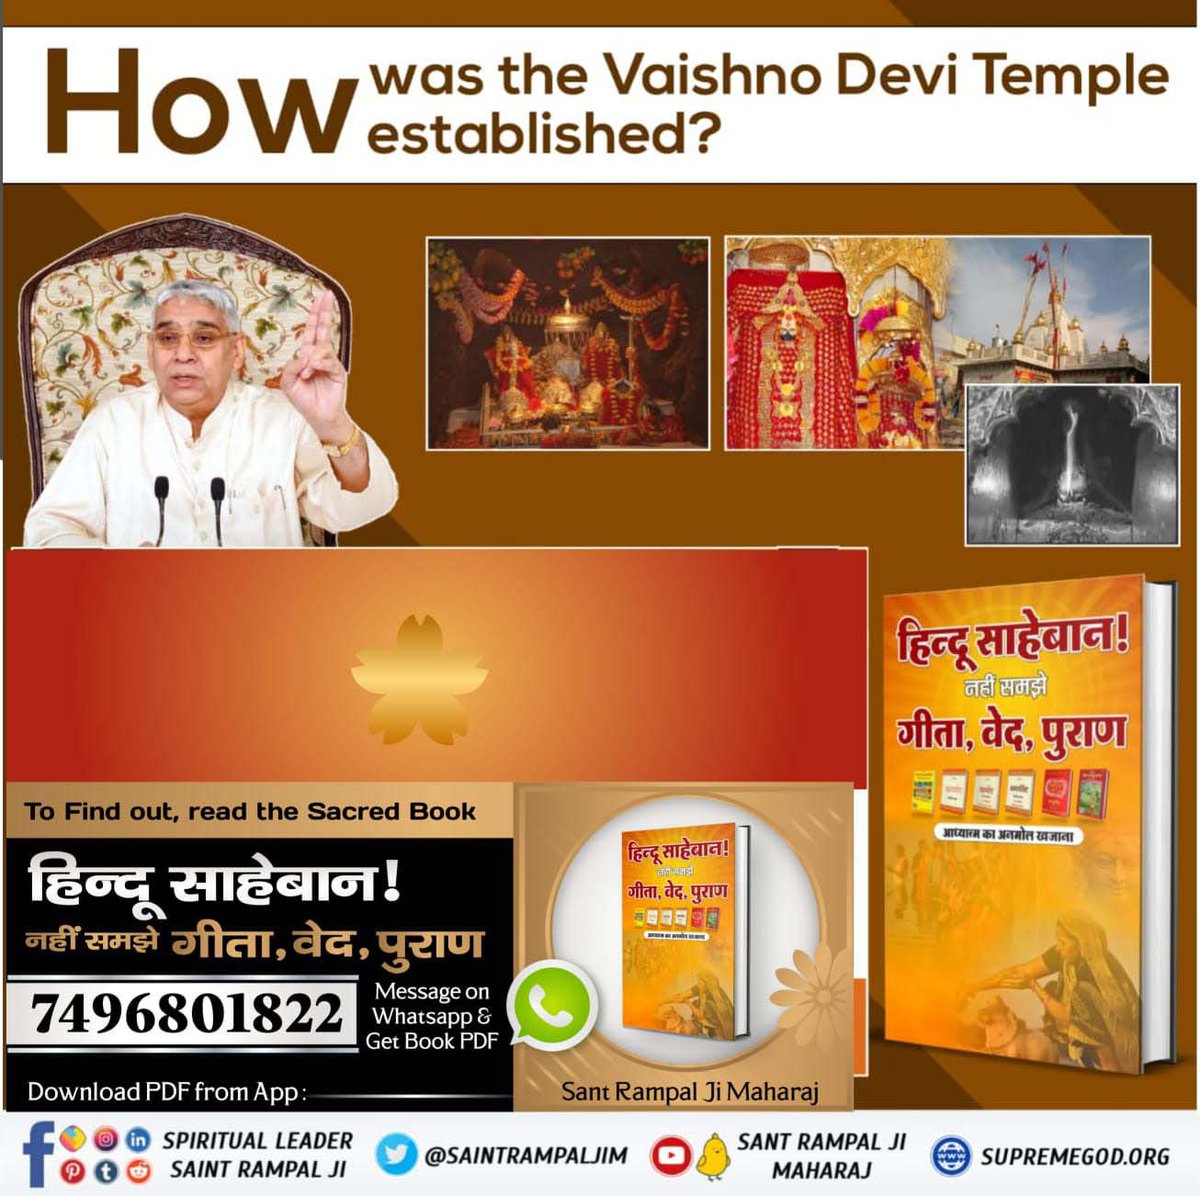 #धर्म_का_आधार_ग्रंथ_होते_हैं कृपया उन्हीं से सीख लें In order to know the history of Vaishnodevi temple read the book mentioned in the image. This book is a way to attain salvation.